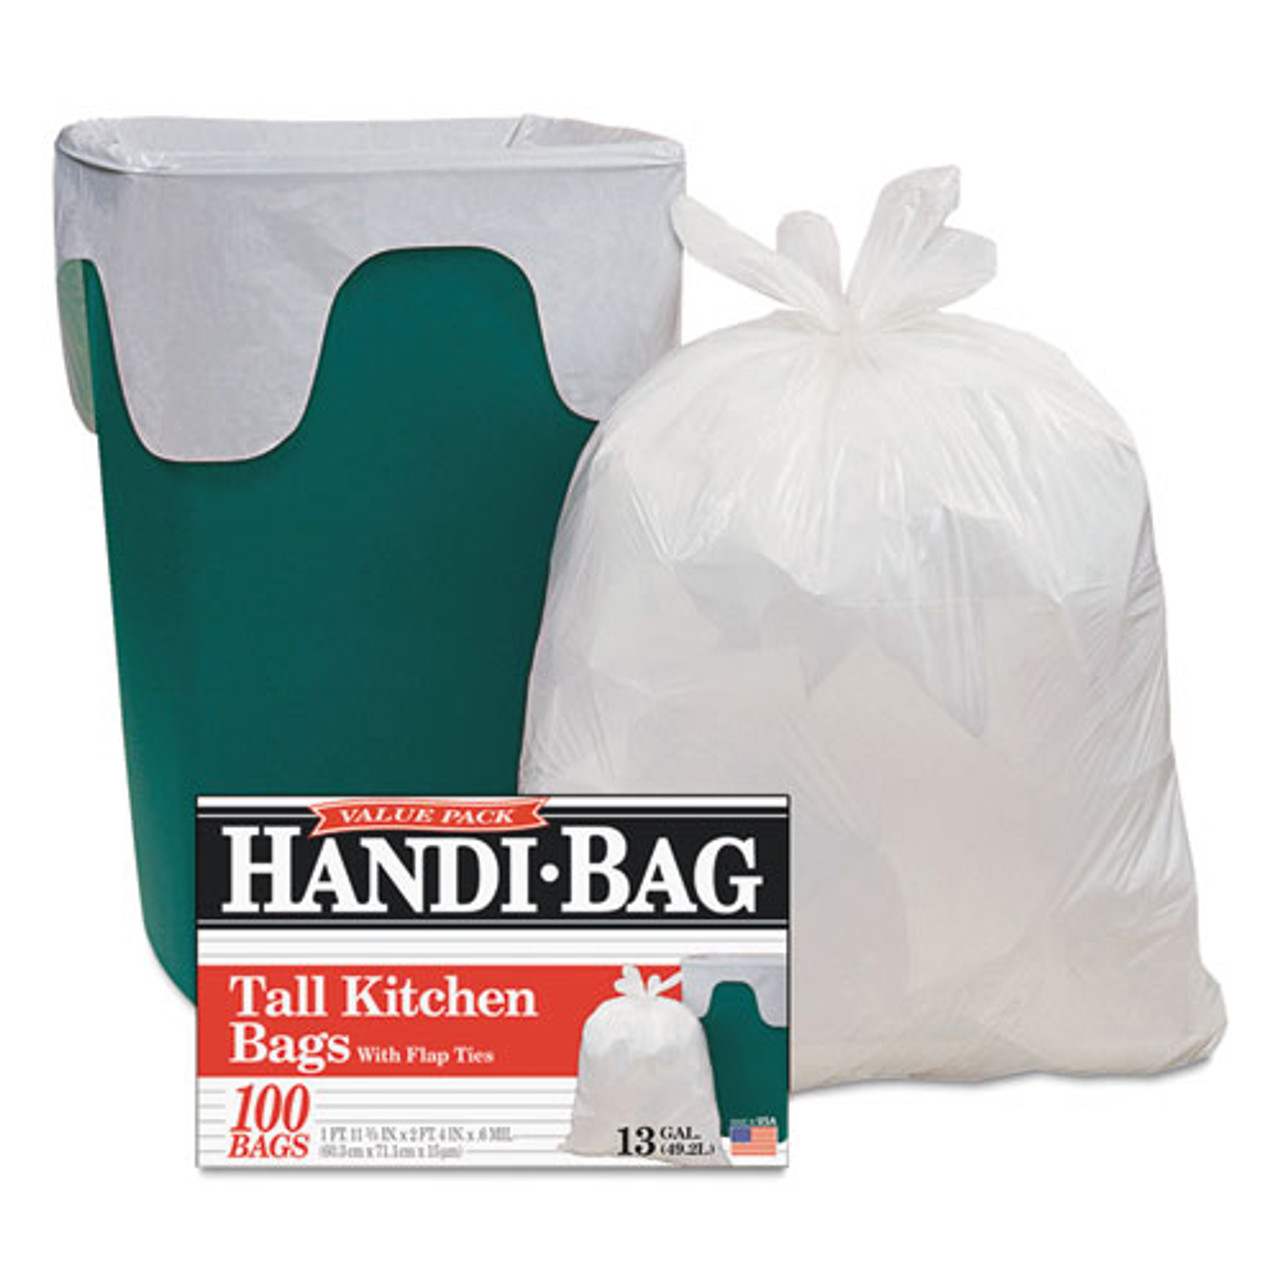 Commercial trash bags 13 gallon 24x28 .6 mil case of 100